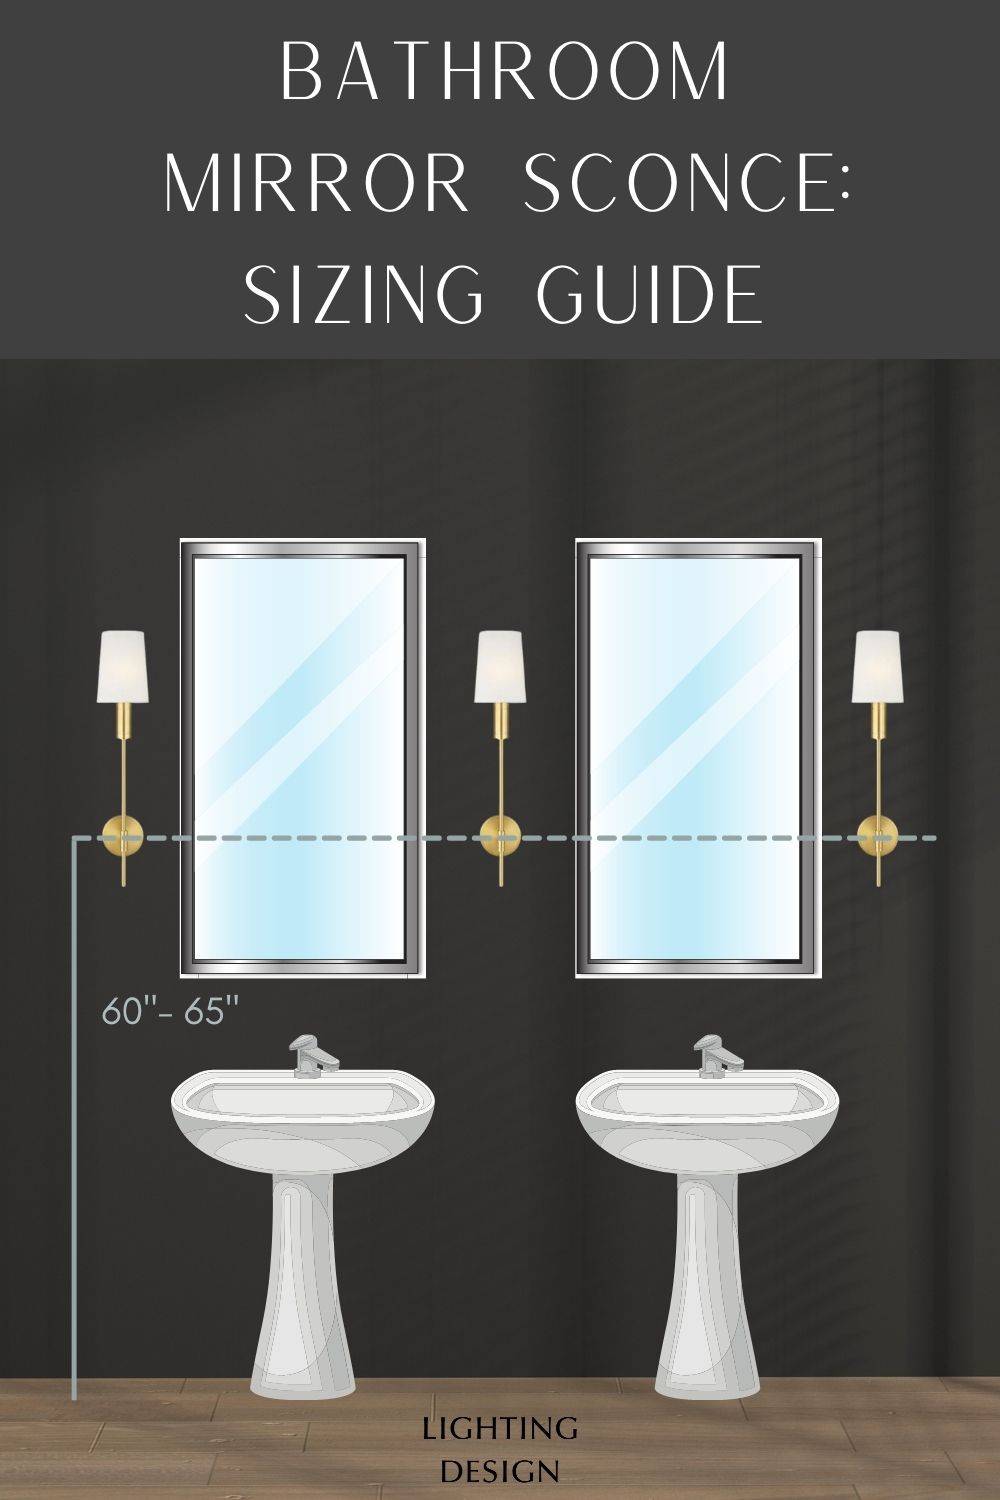 A bathroom sizing guide with a mirror and sink